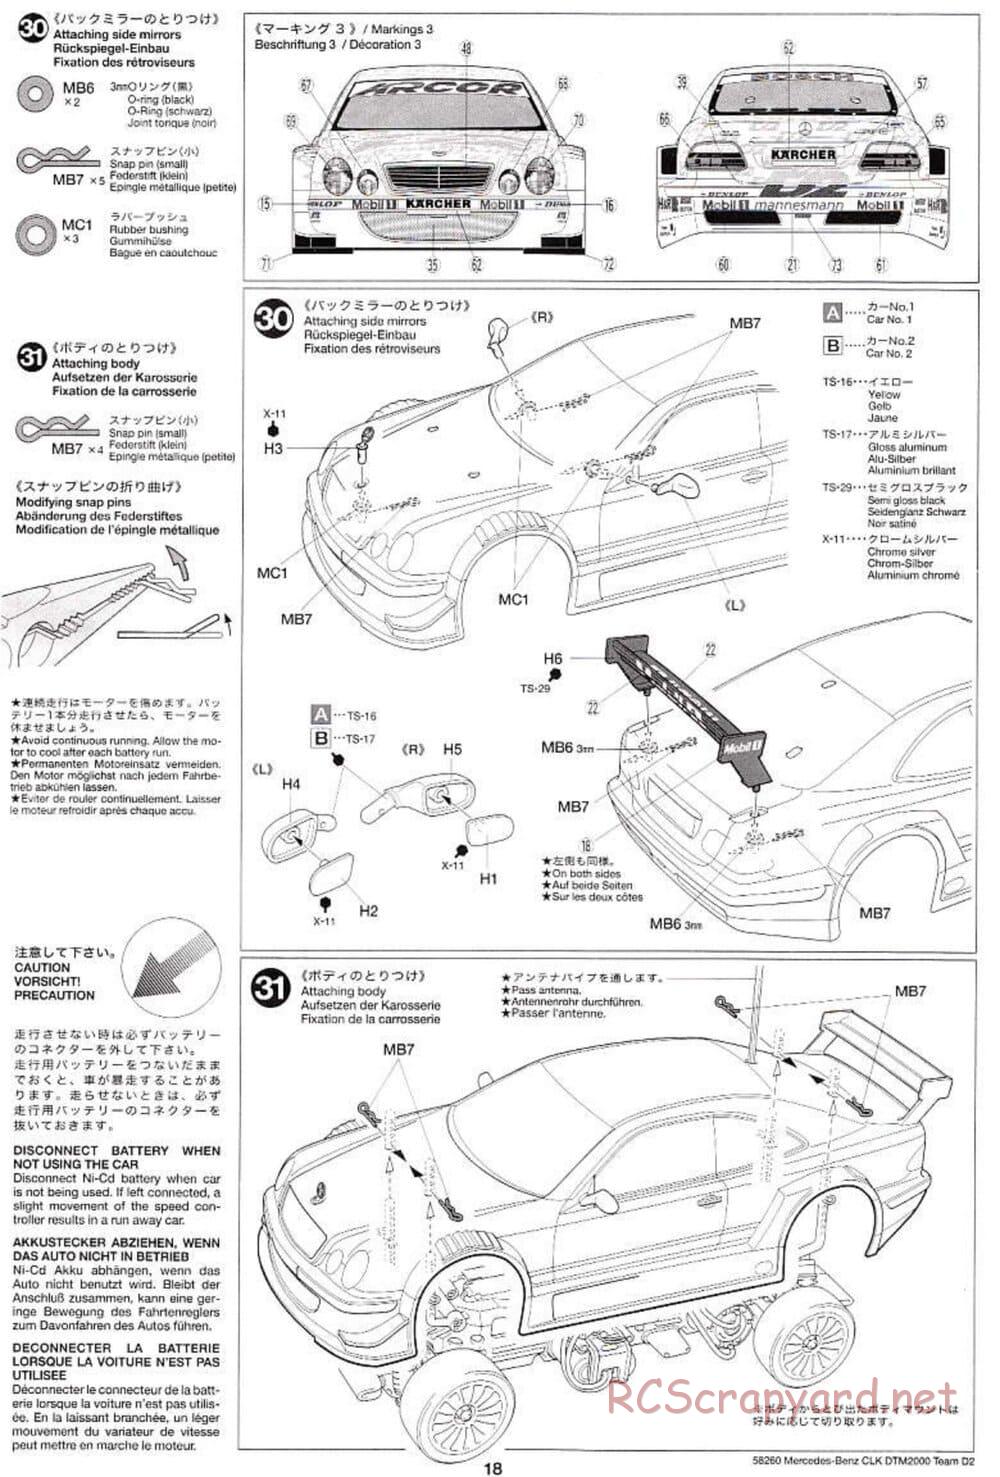 Tamiya - Mercedes Benz CLK DTM 2000 Team D2 - TL-01 Chassis - Manual - Page 18